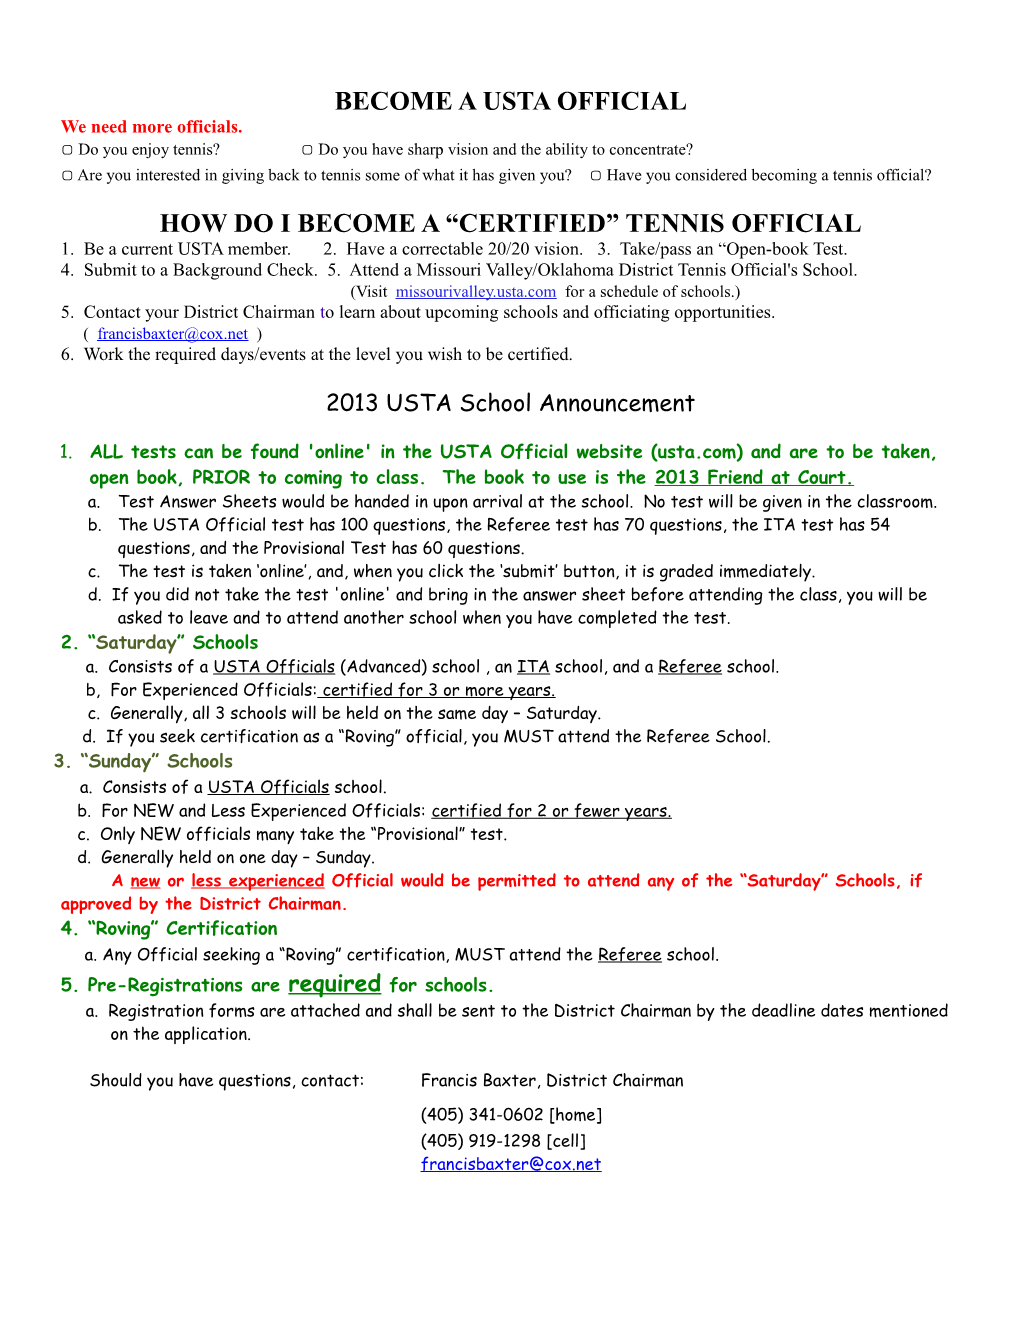 Become a Usta Official